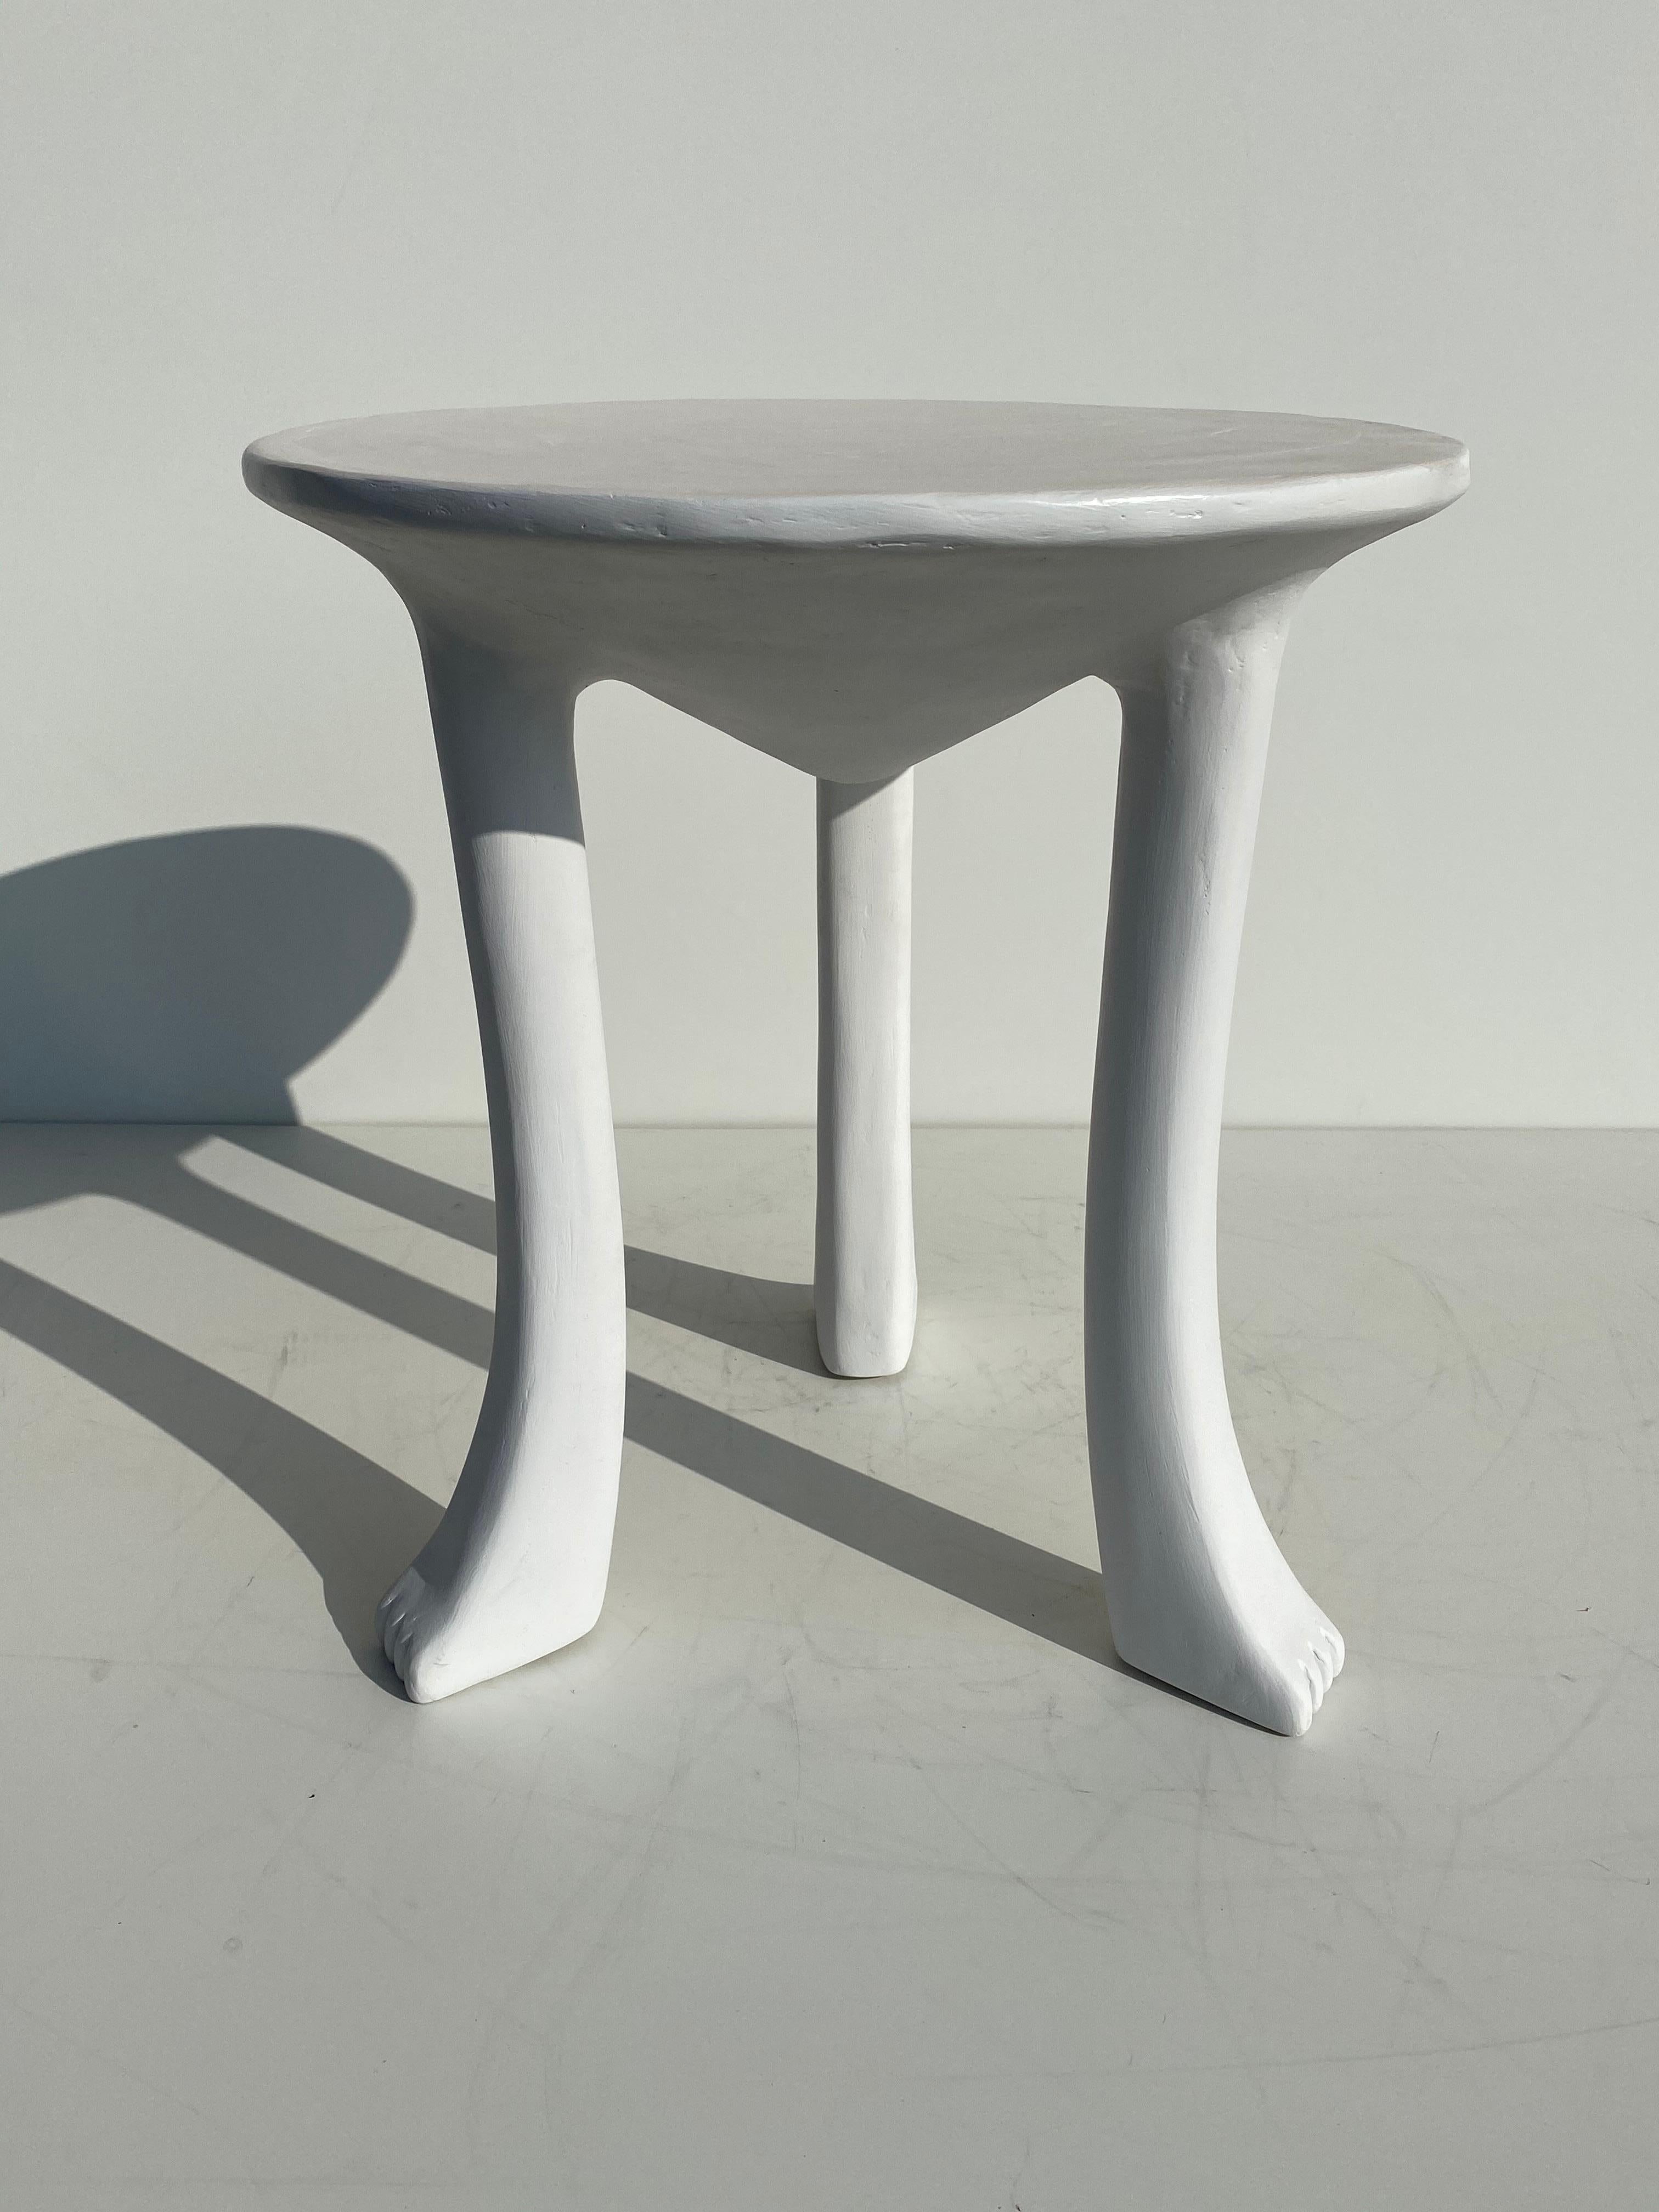 American Pair of African Plaster Side Tables